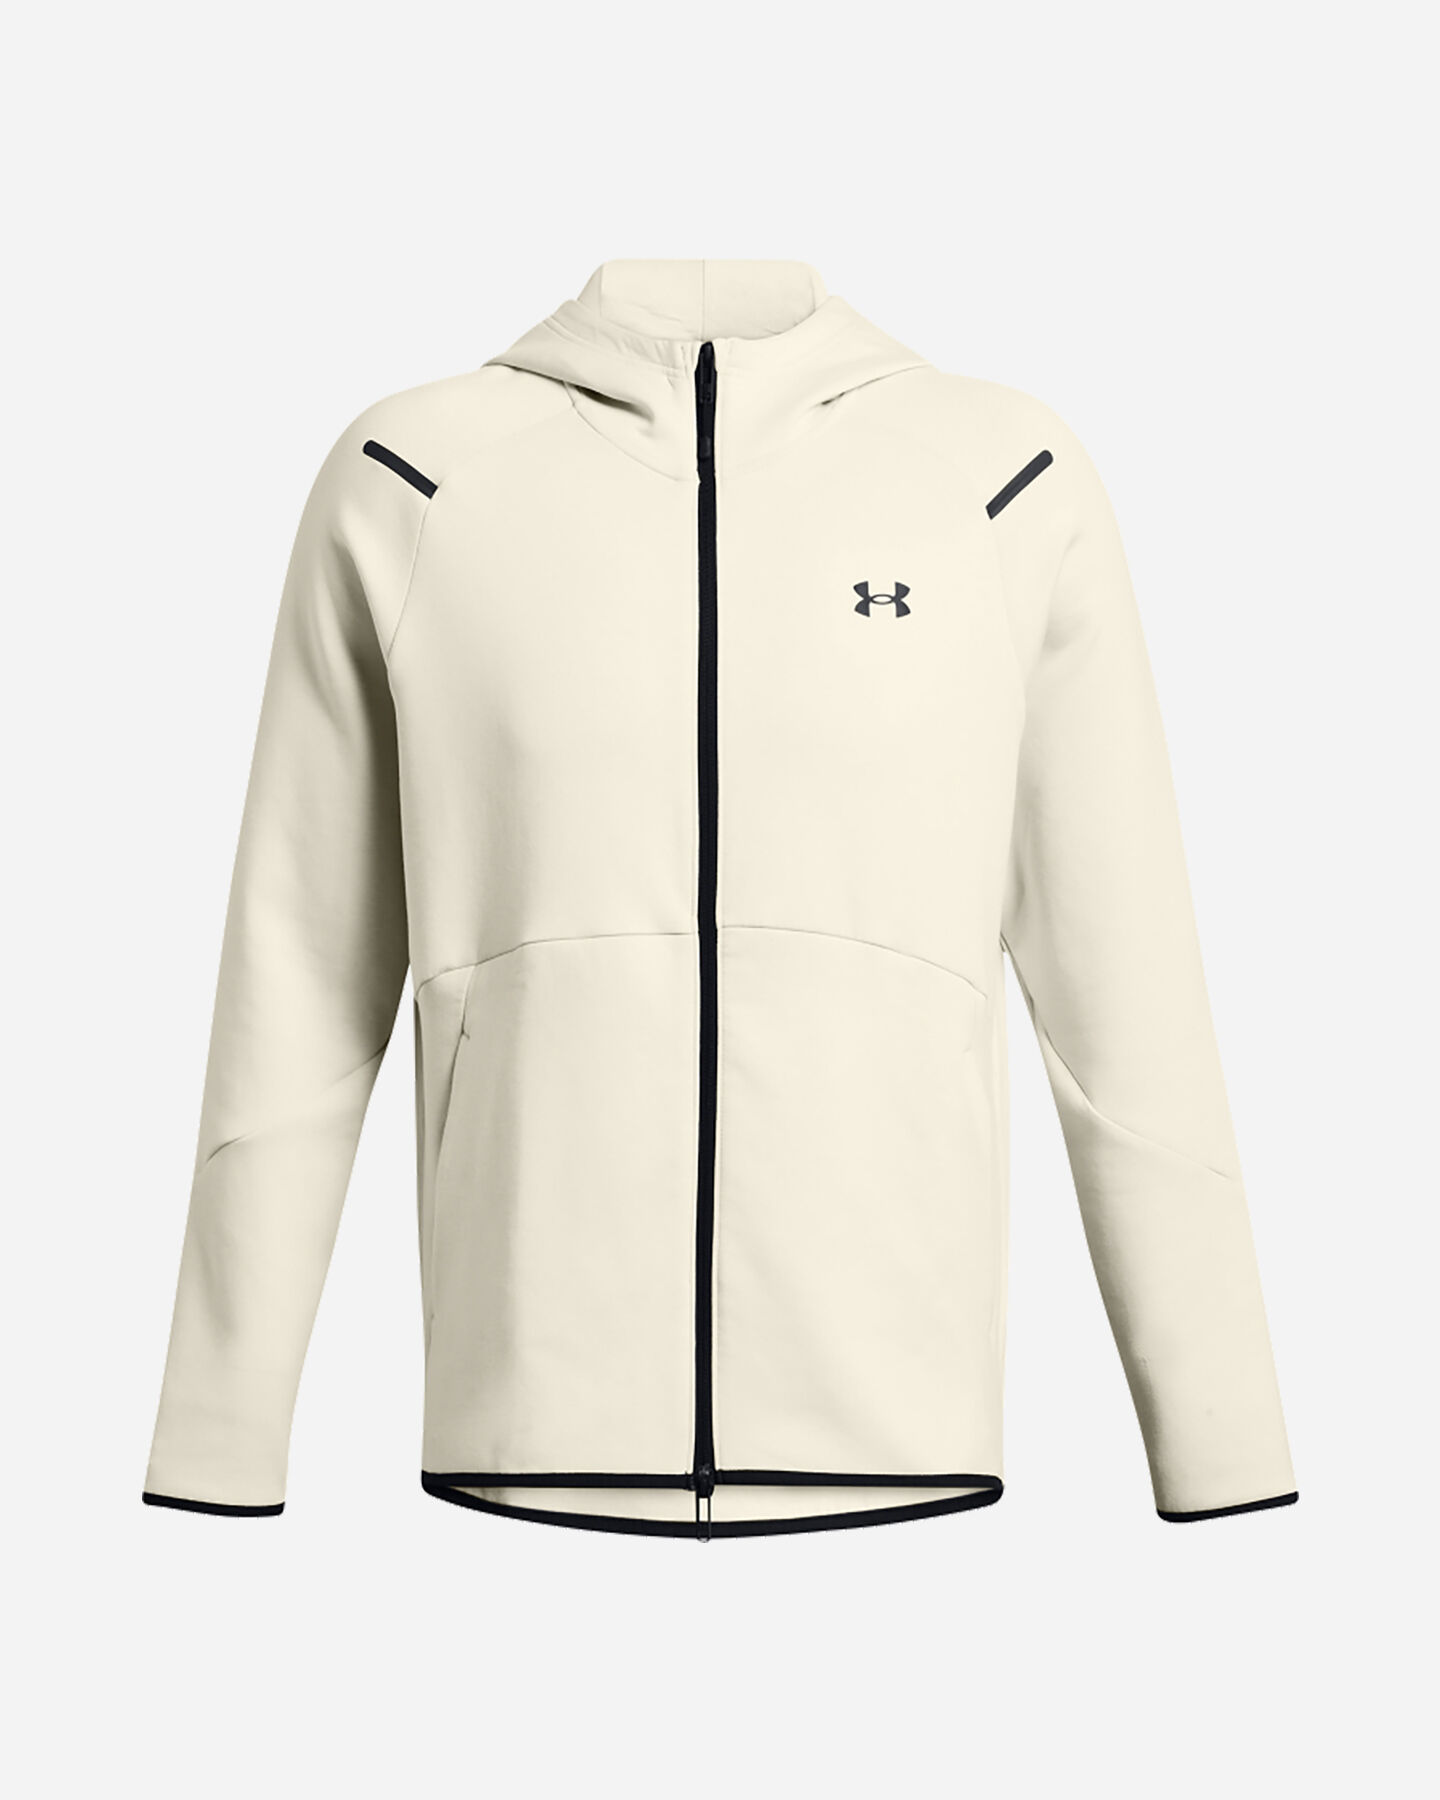  Felpa UNDER ARMOUR UNSTOPPABLEKNIT M S5641301|0273|XS scatto 0